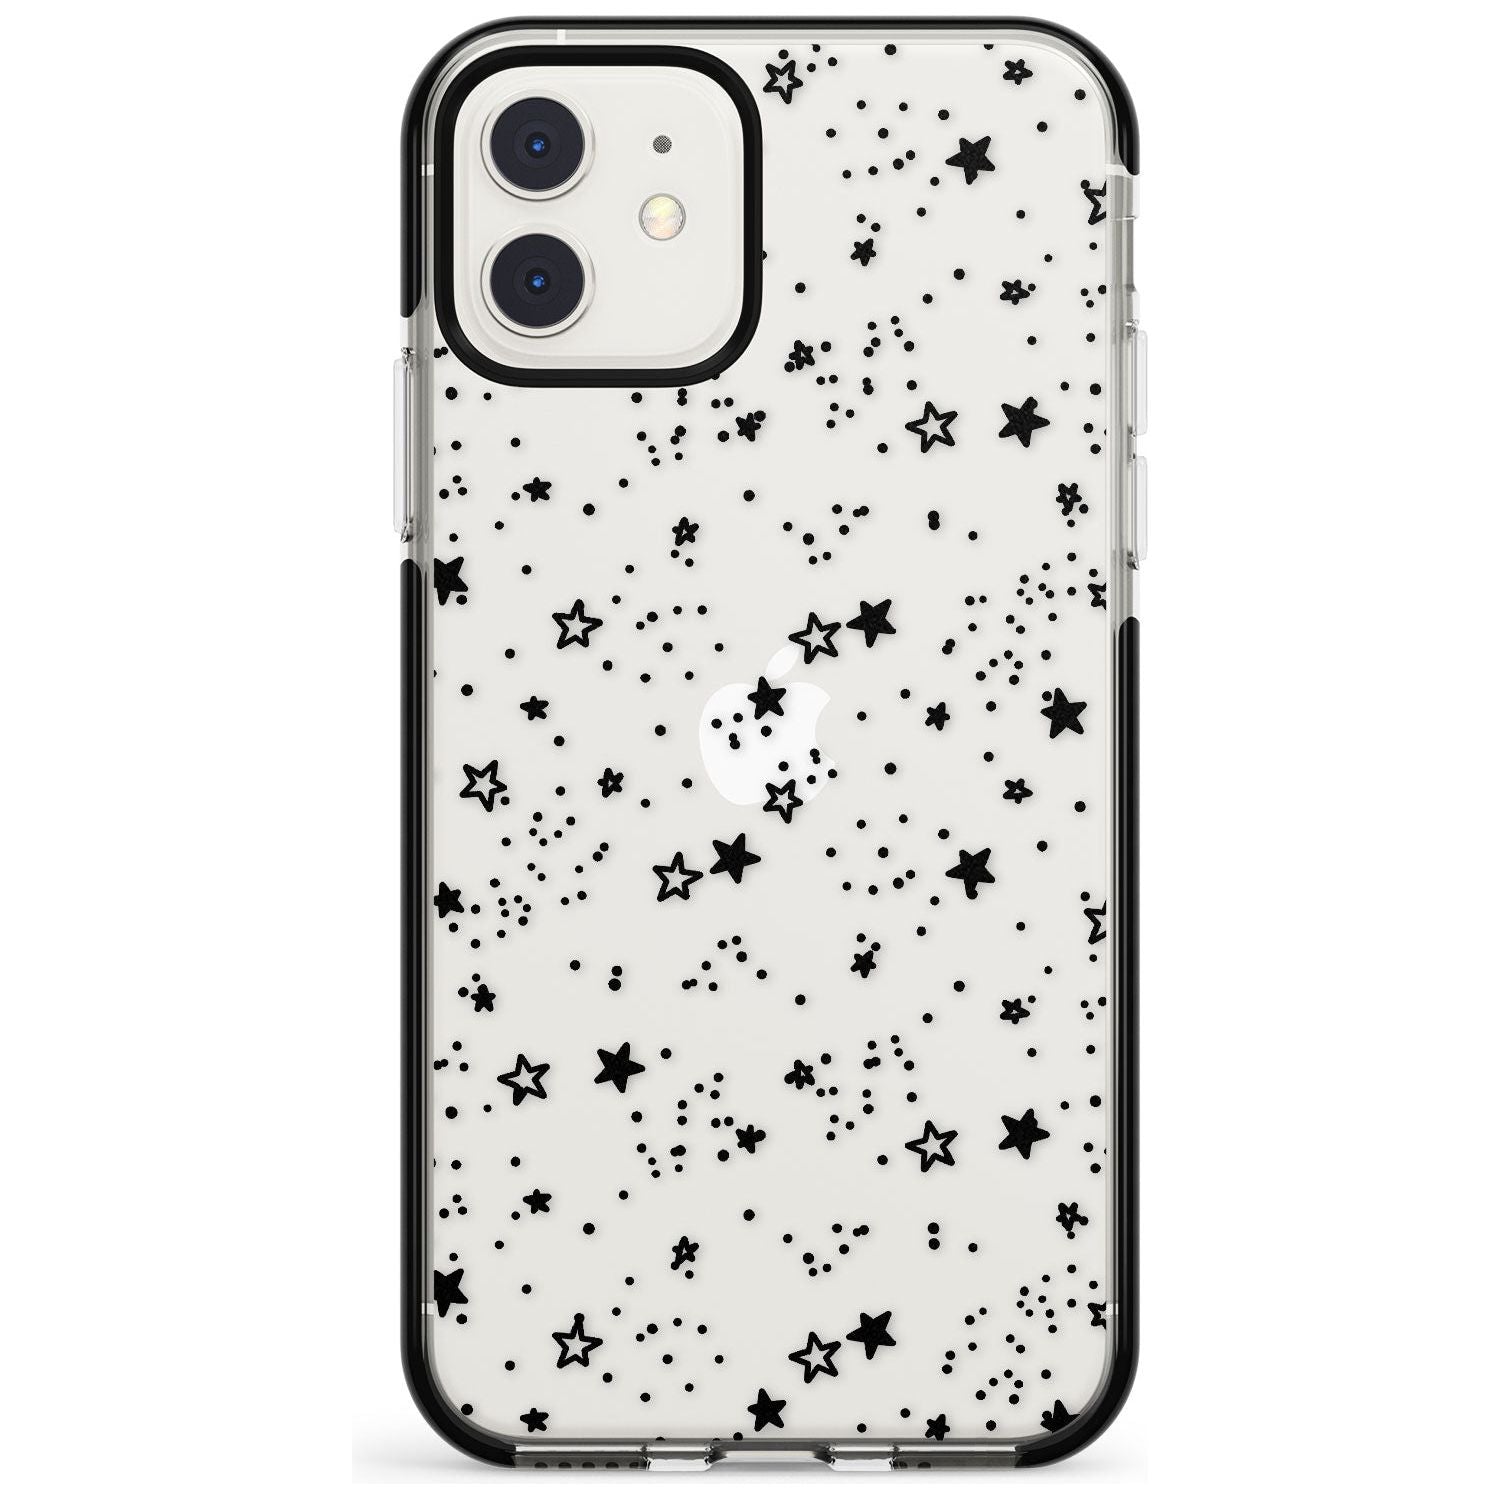 Solid Stars Black Impact Phone Case for iPhone 11